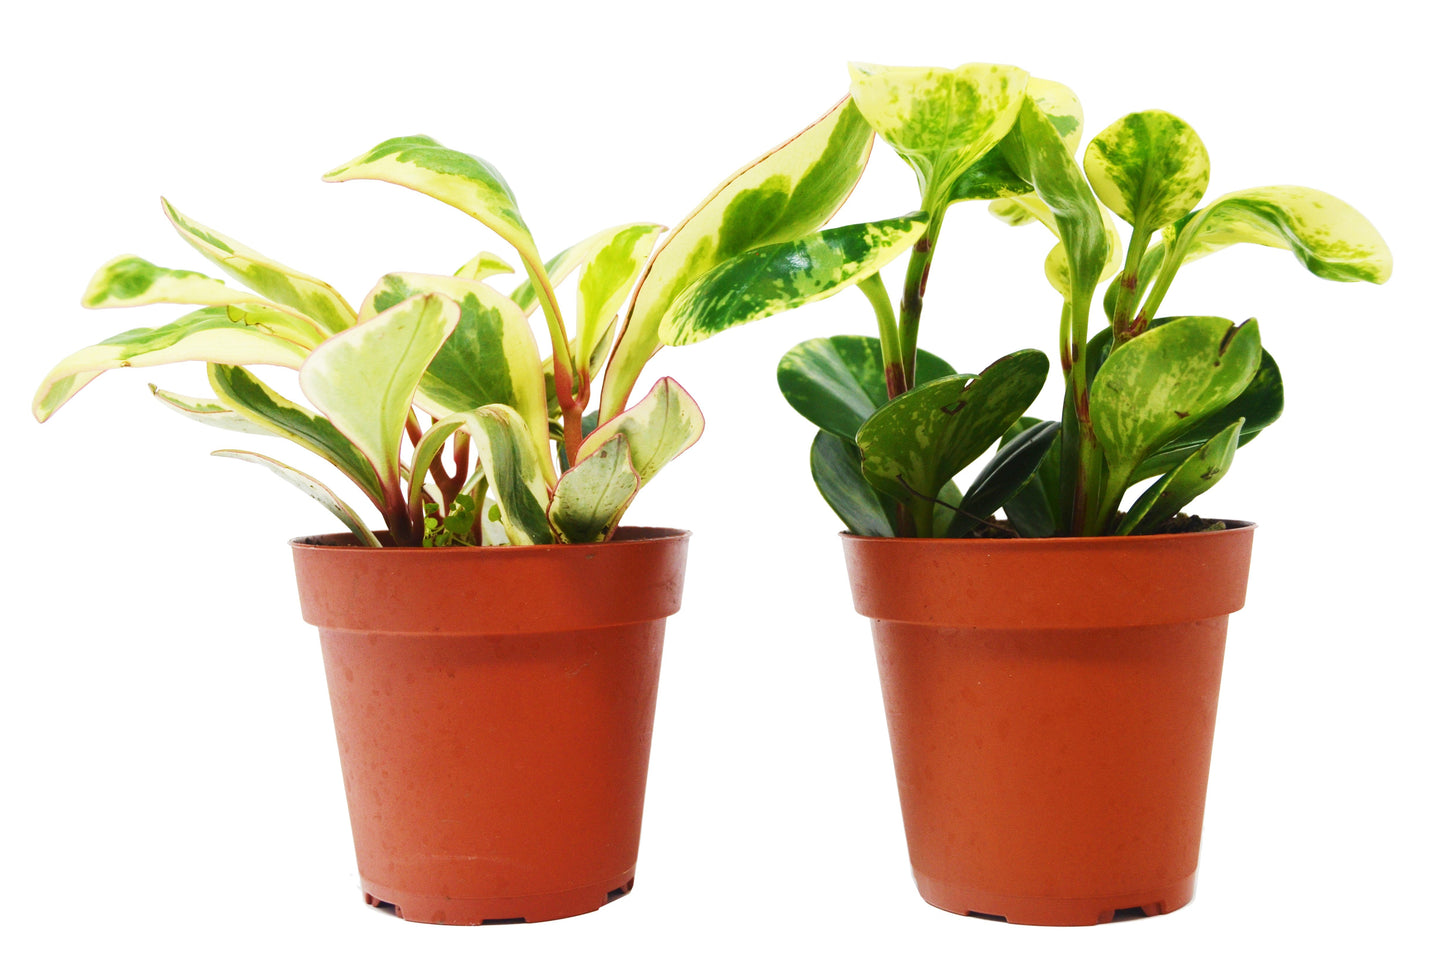 2 Peperomia Plants Variety Pack in 4" Pots - Baby Rubber Plants